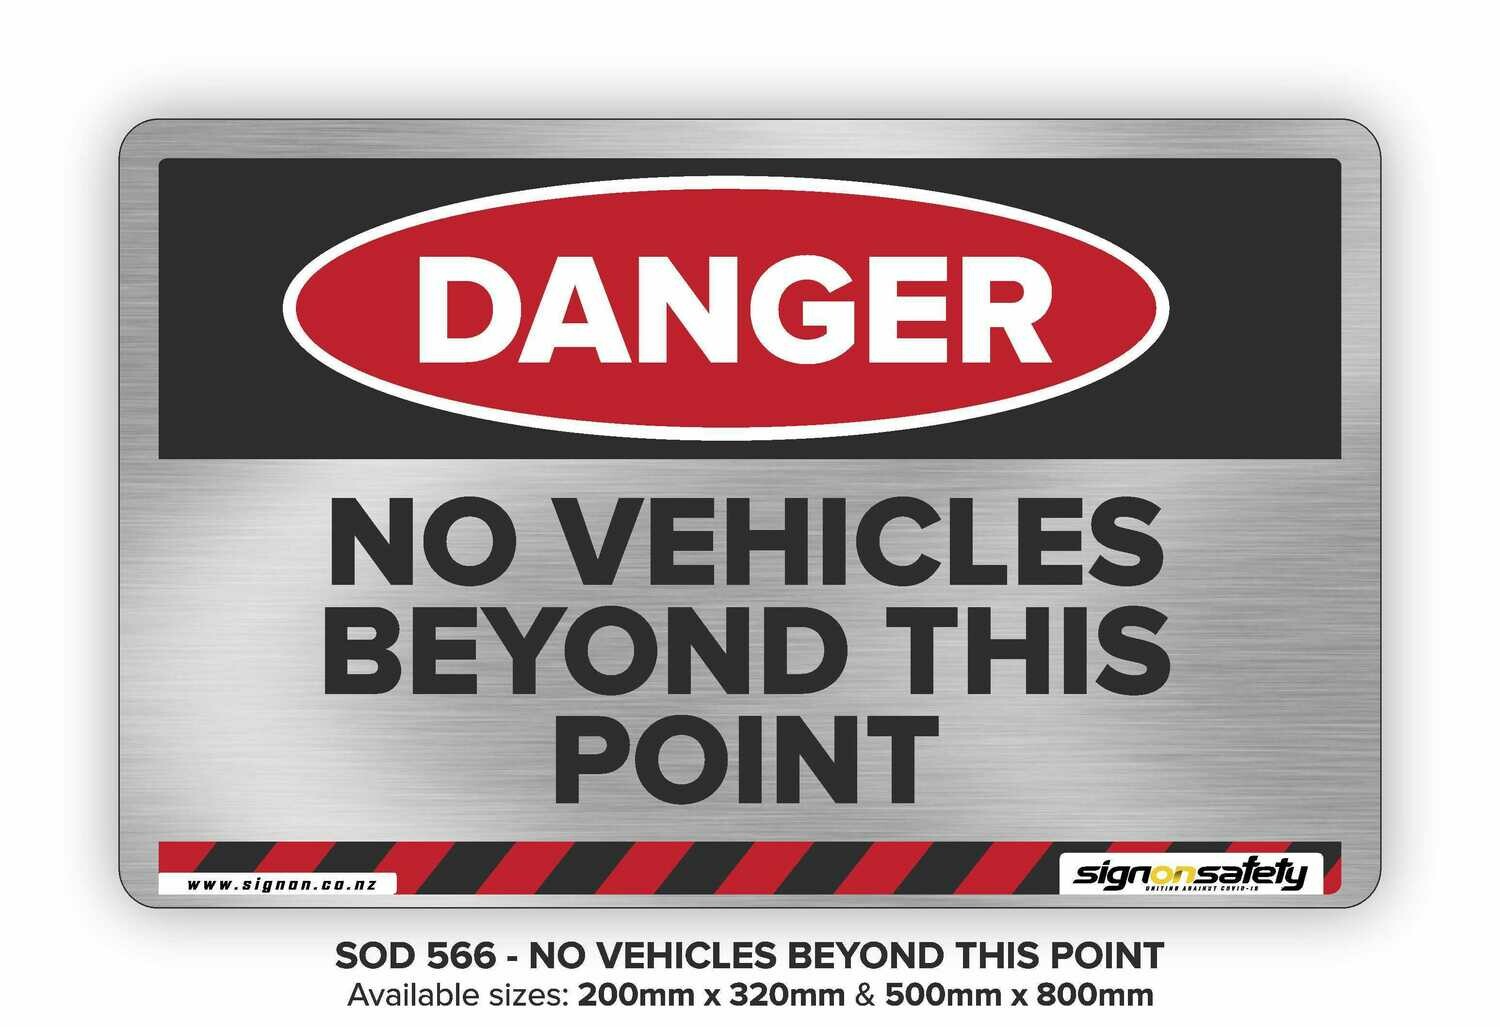 Danger - No Vehicles Beyond This Point